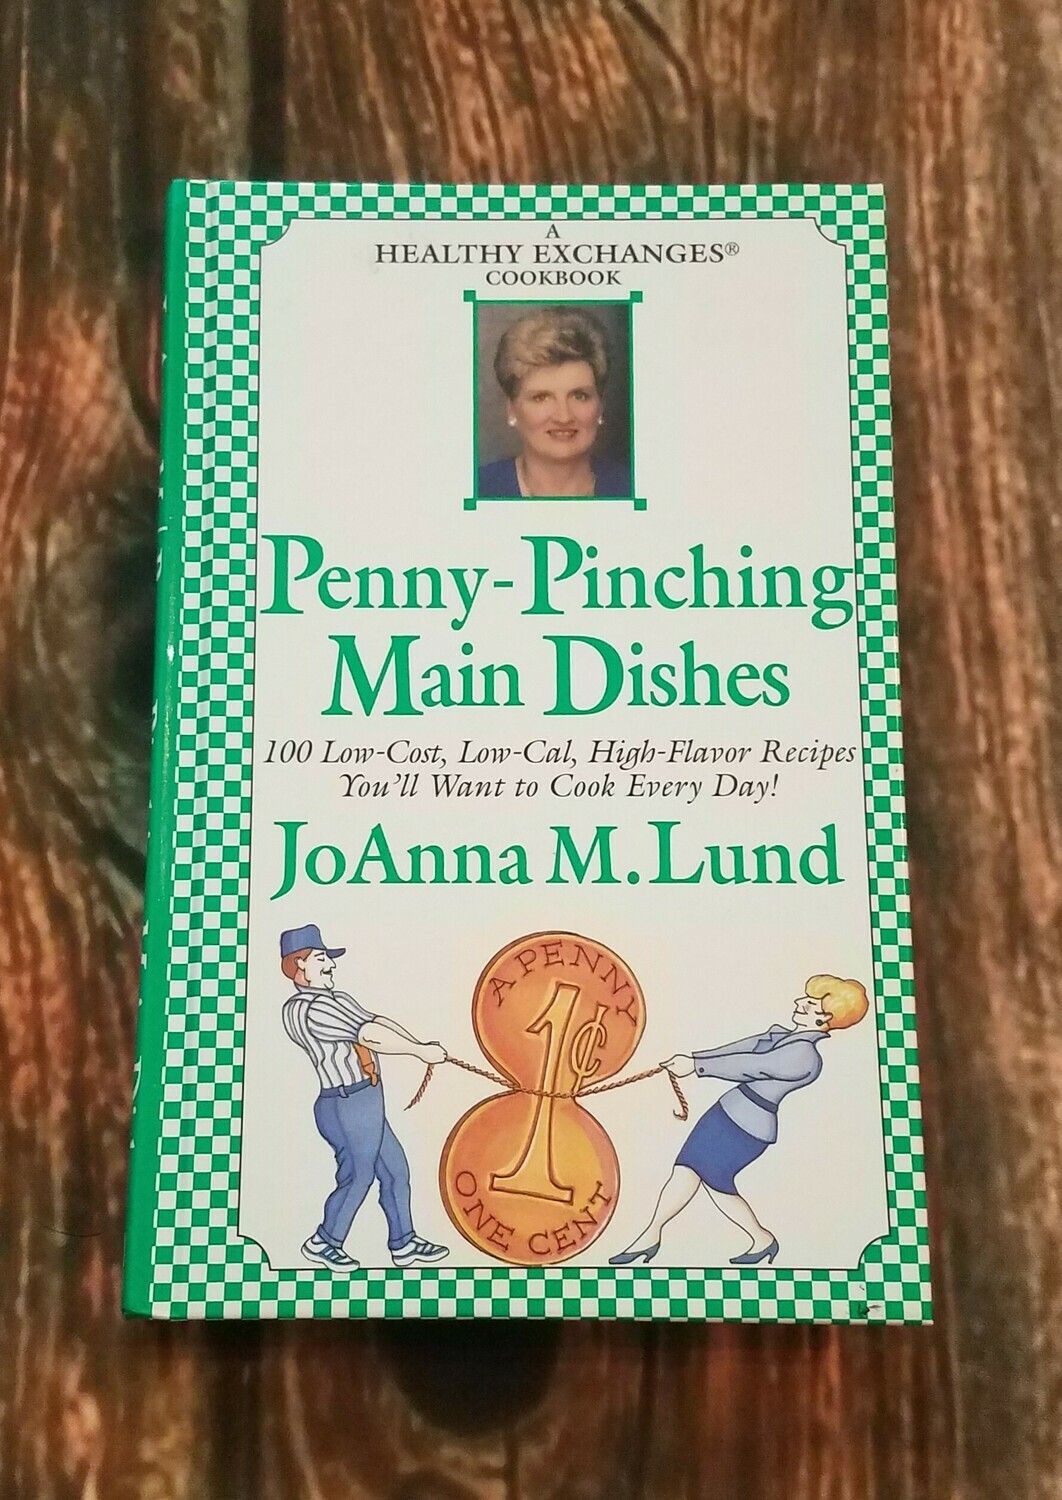 Penny-Pinching Main Dishes by JoAnna M. Lund